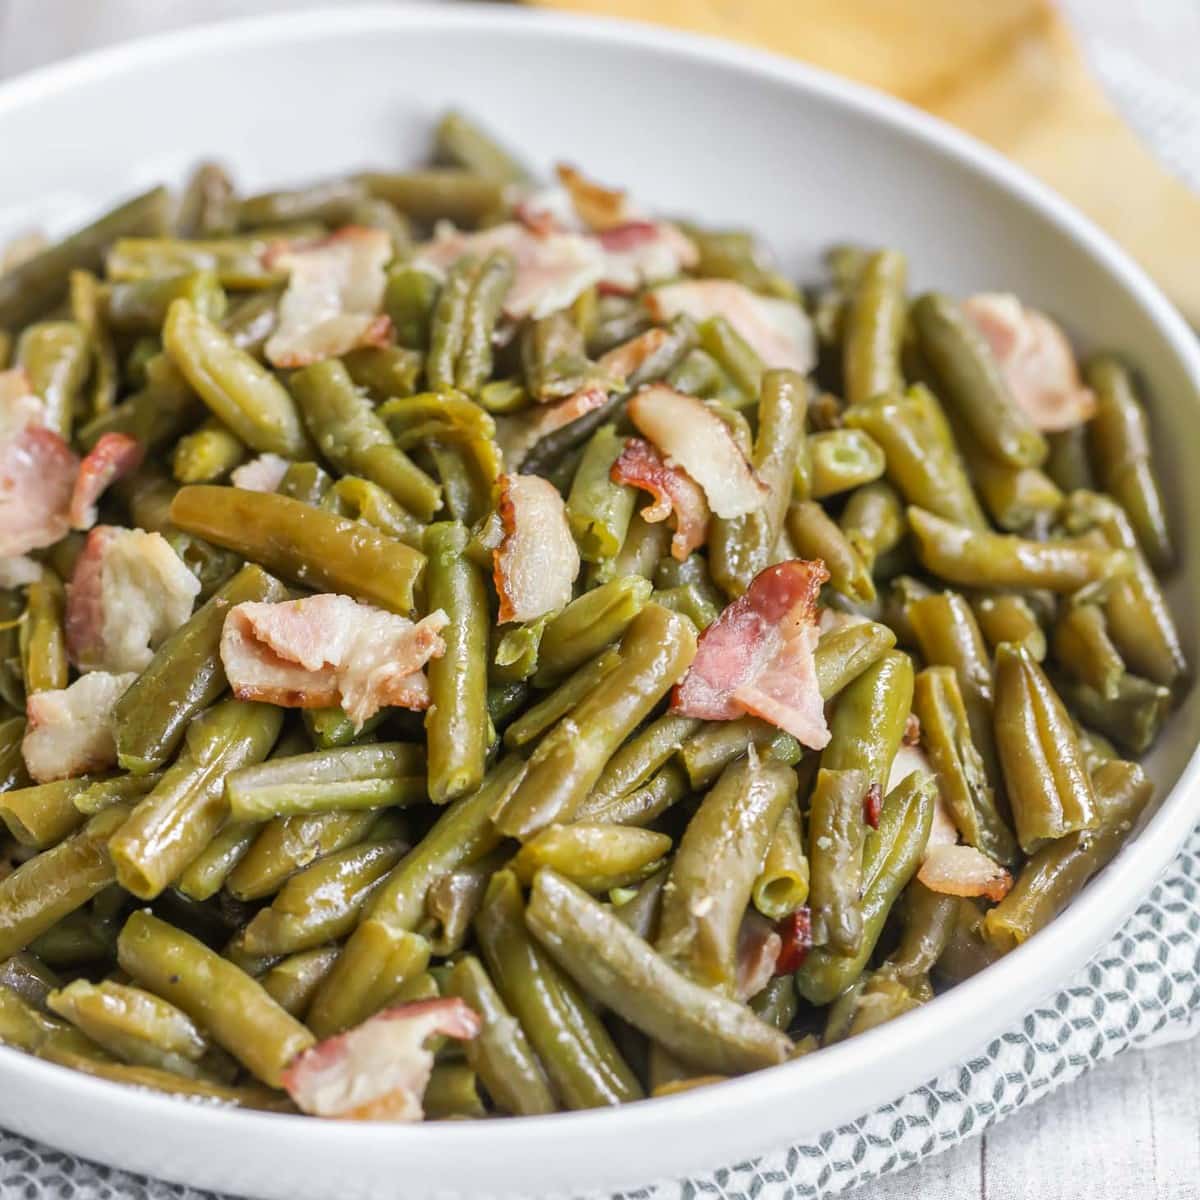 Crockpot side dishes - crockpot green beans with bacon served in a white bowl.